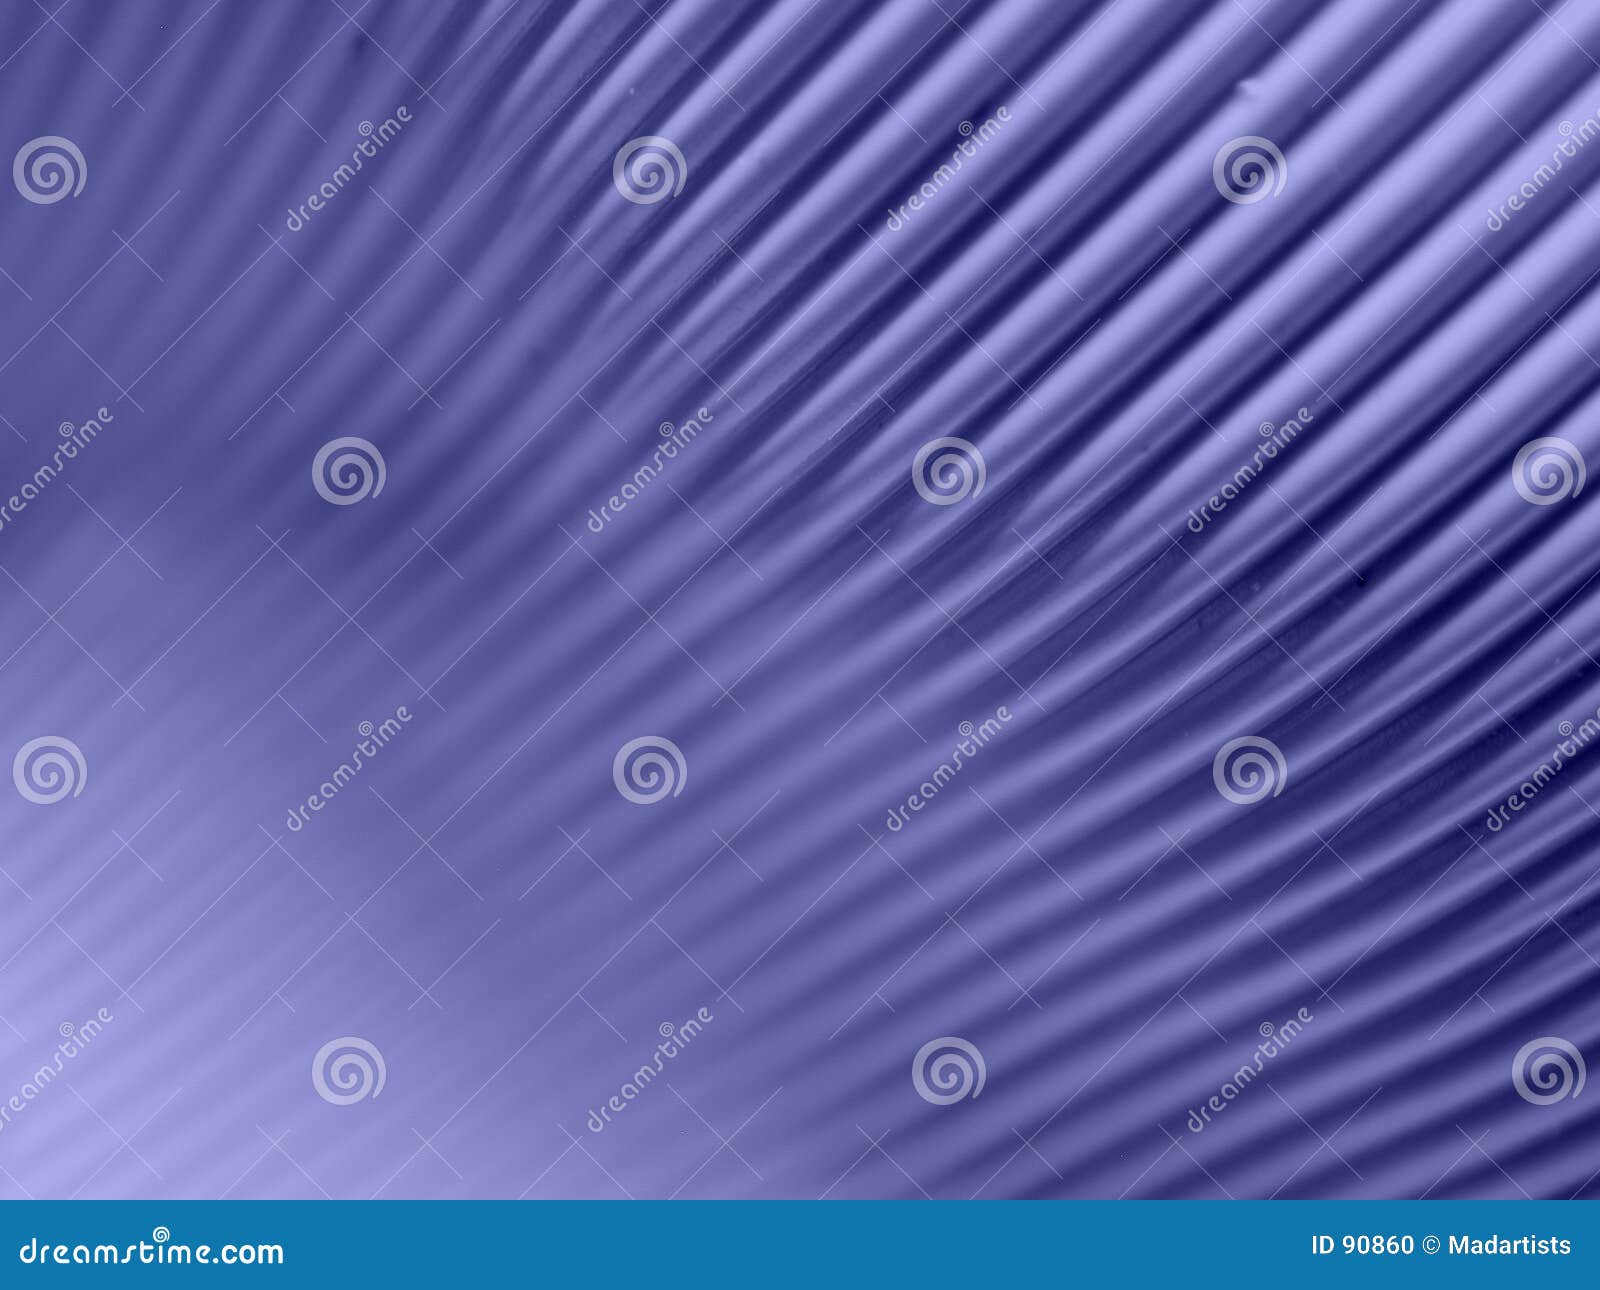 Computer Cable Background 3 Stock Photo - Image of cables, computers: 90860